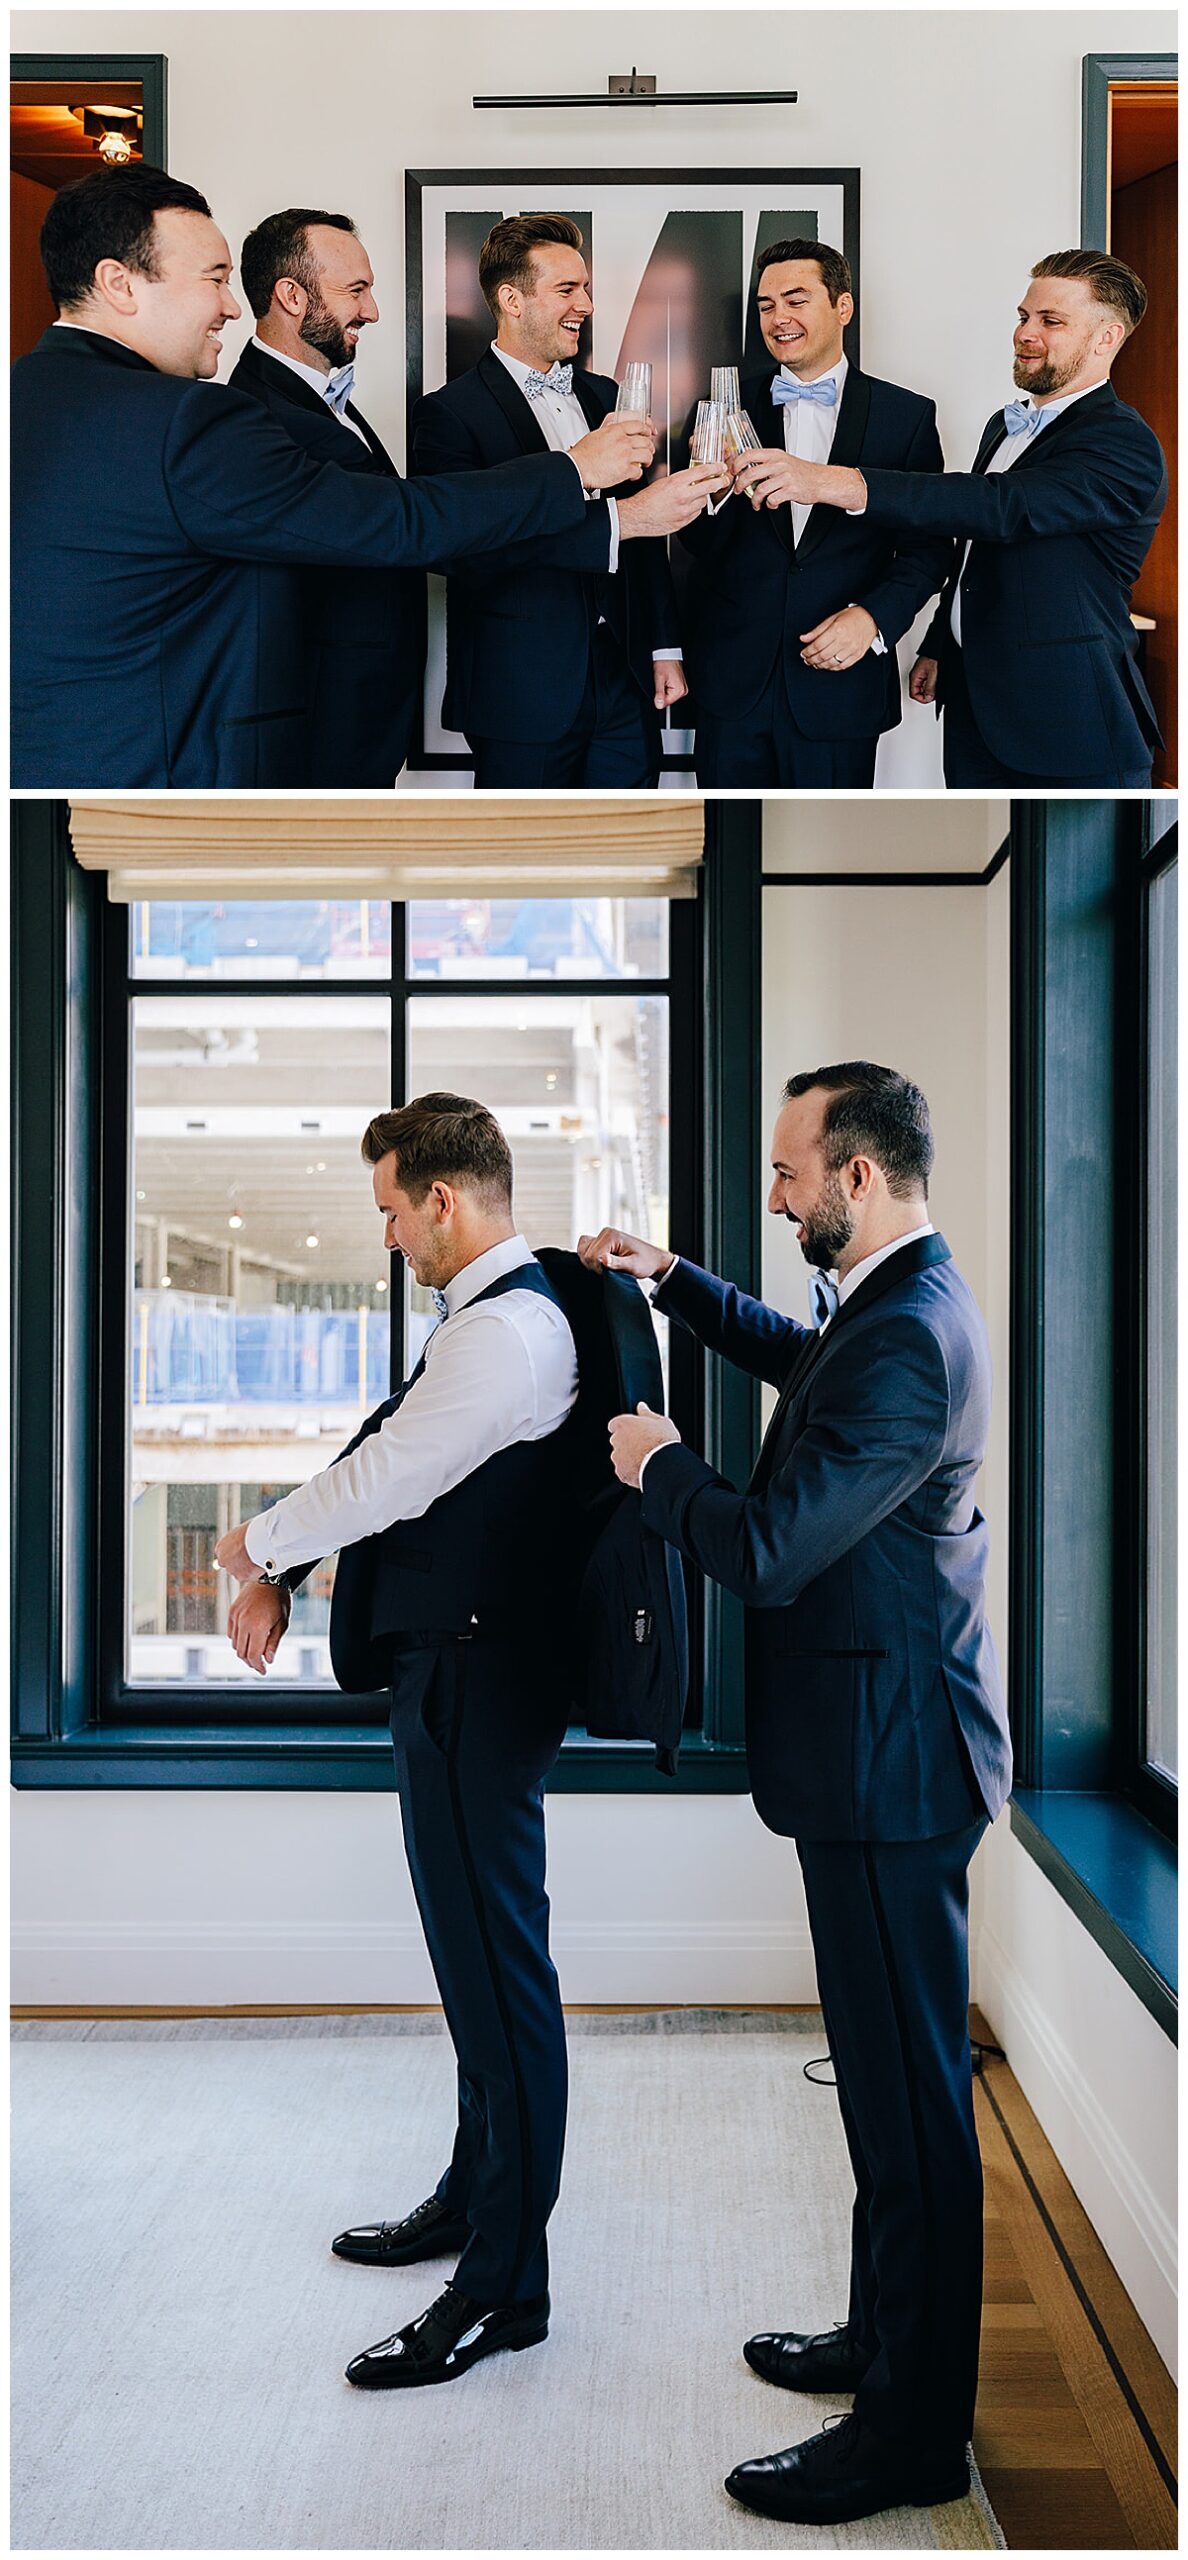 Choosing The Right Location For Your Getting Ready Photos on your wedding is important to get those fun memories of your groomsmen helping you get your suit on